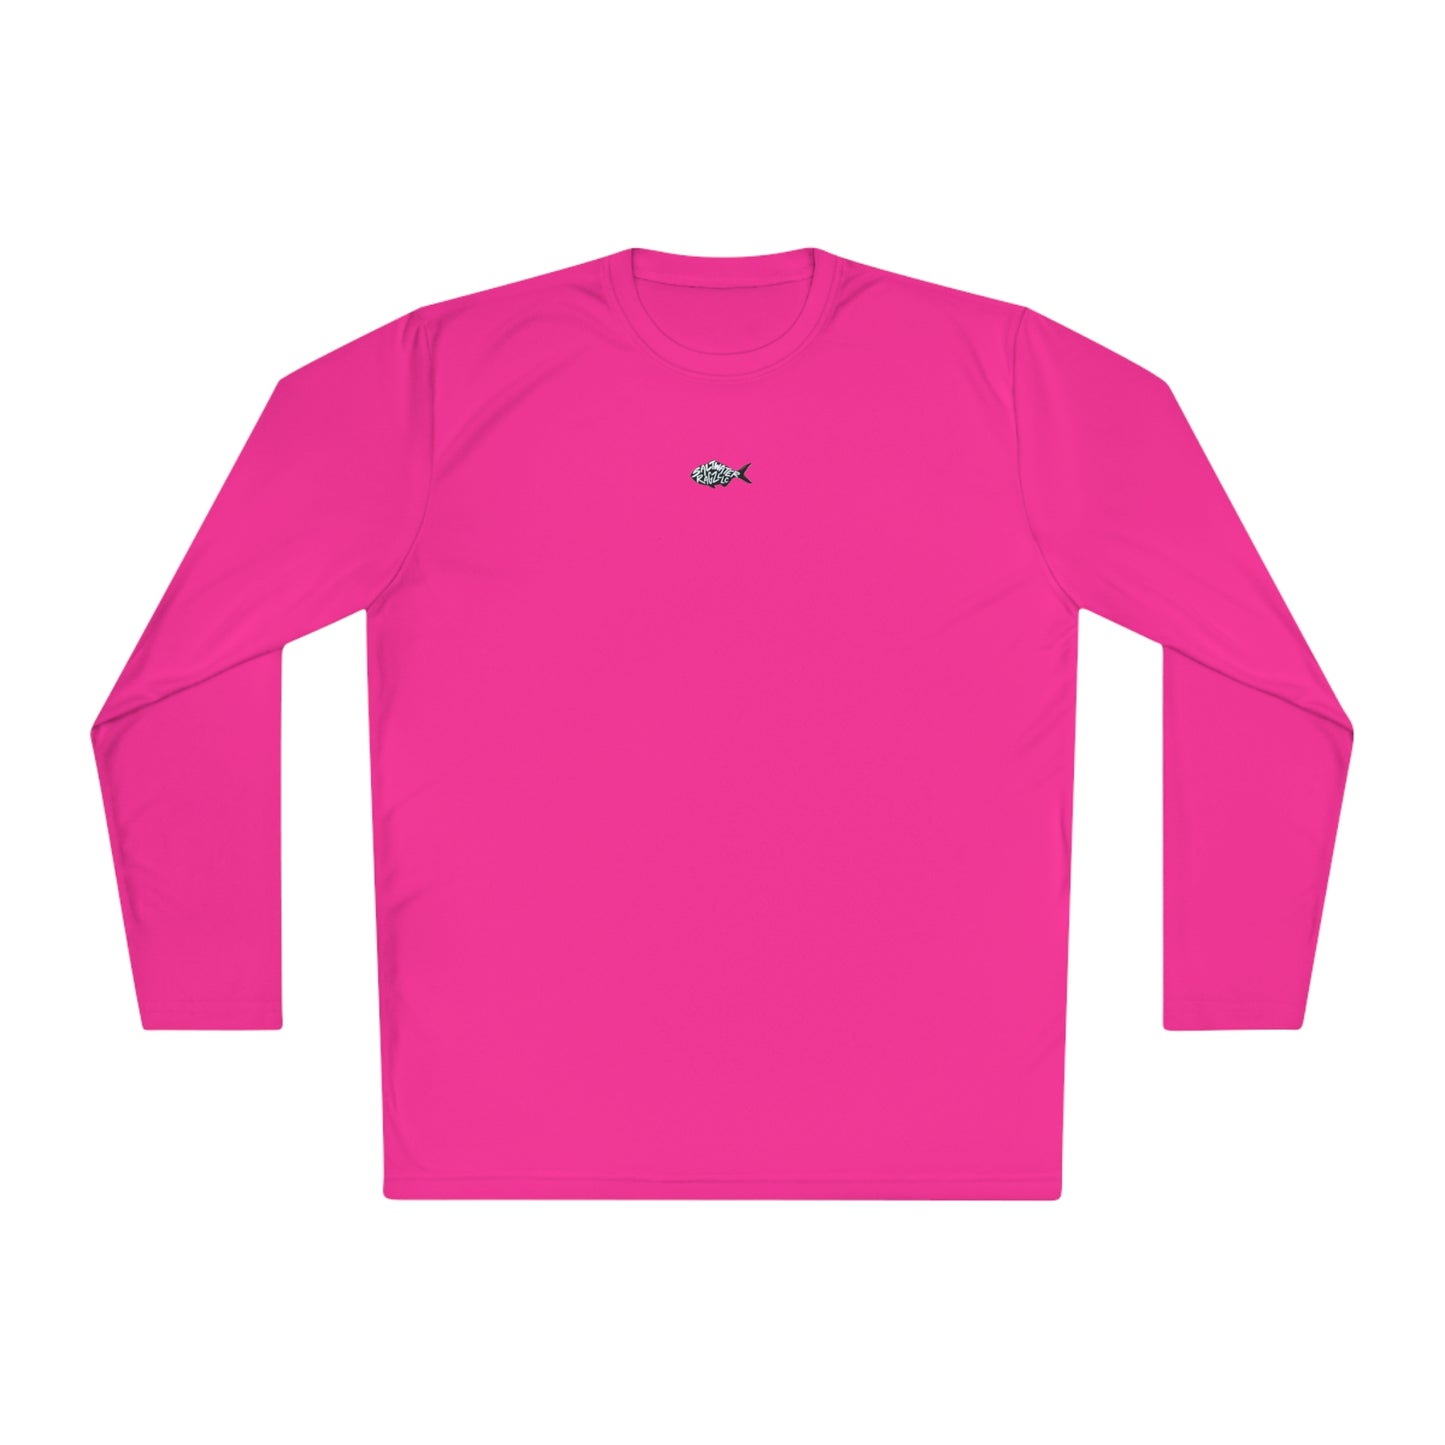 "WHALE PARTY" Moisture Wicking Long Sleeve Tee